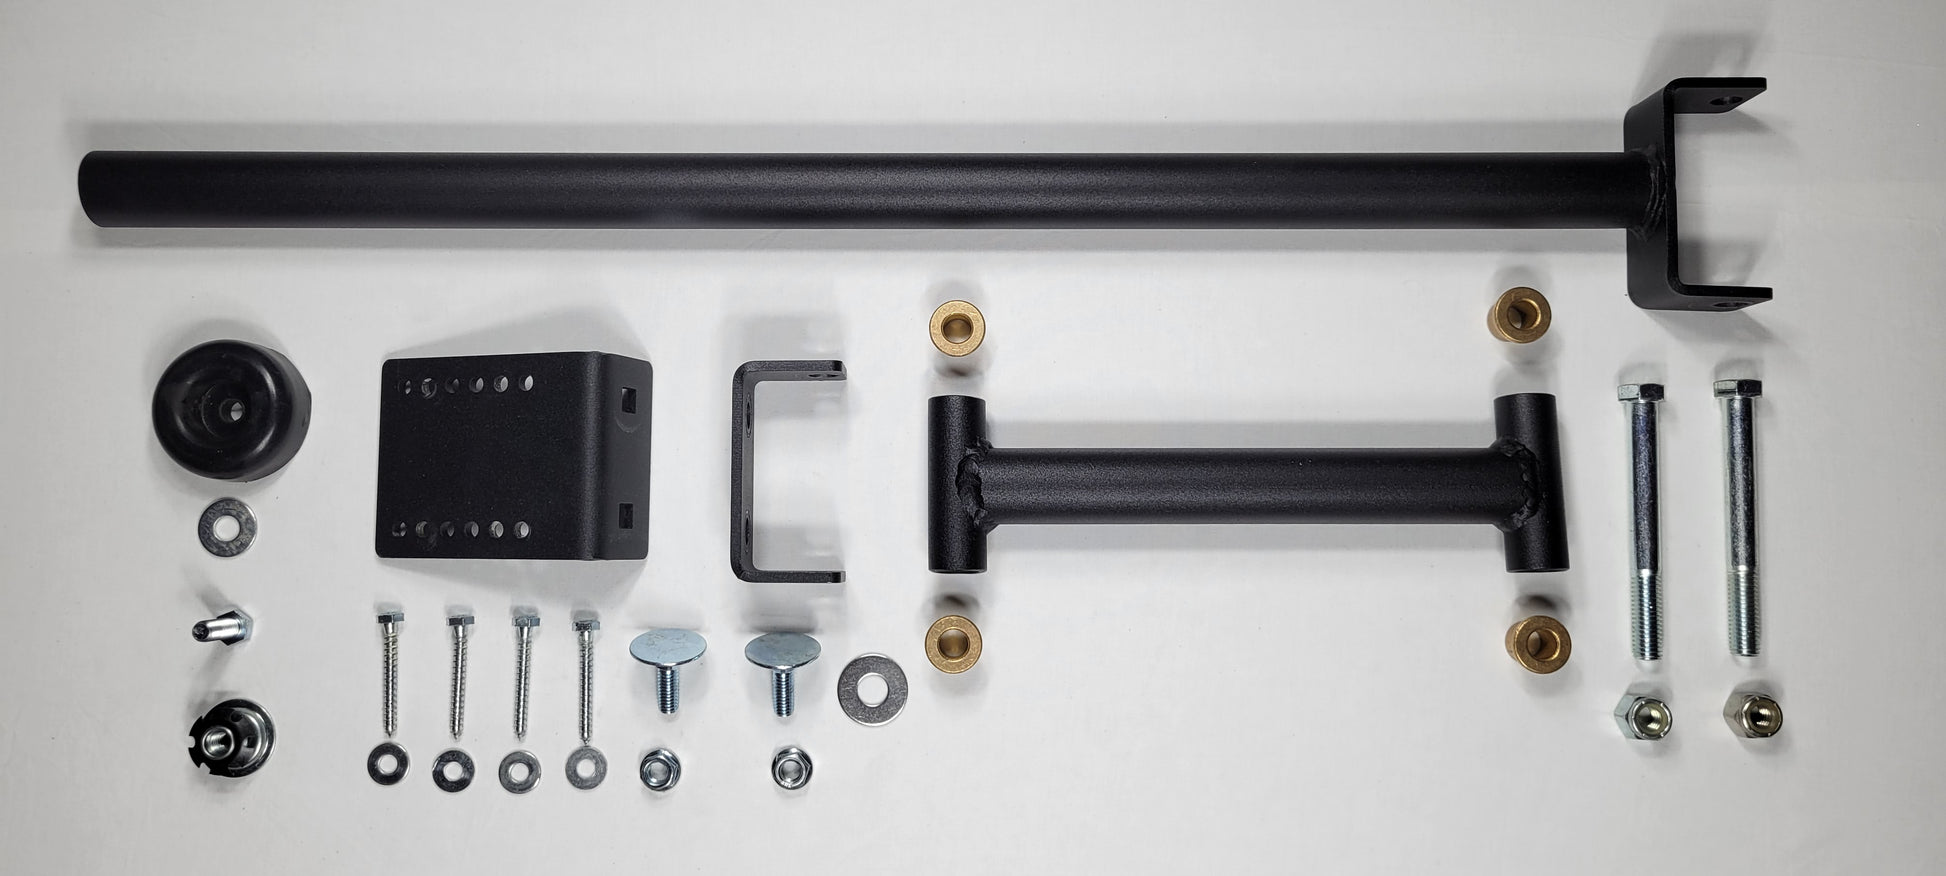 exploded view of 27 inch arm and wall bracket kit